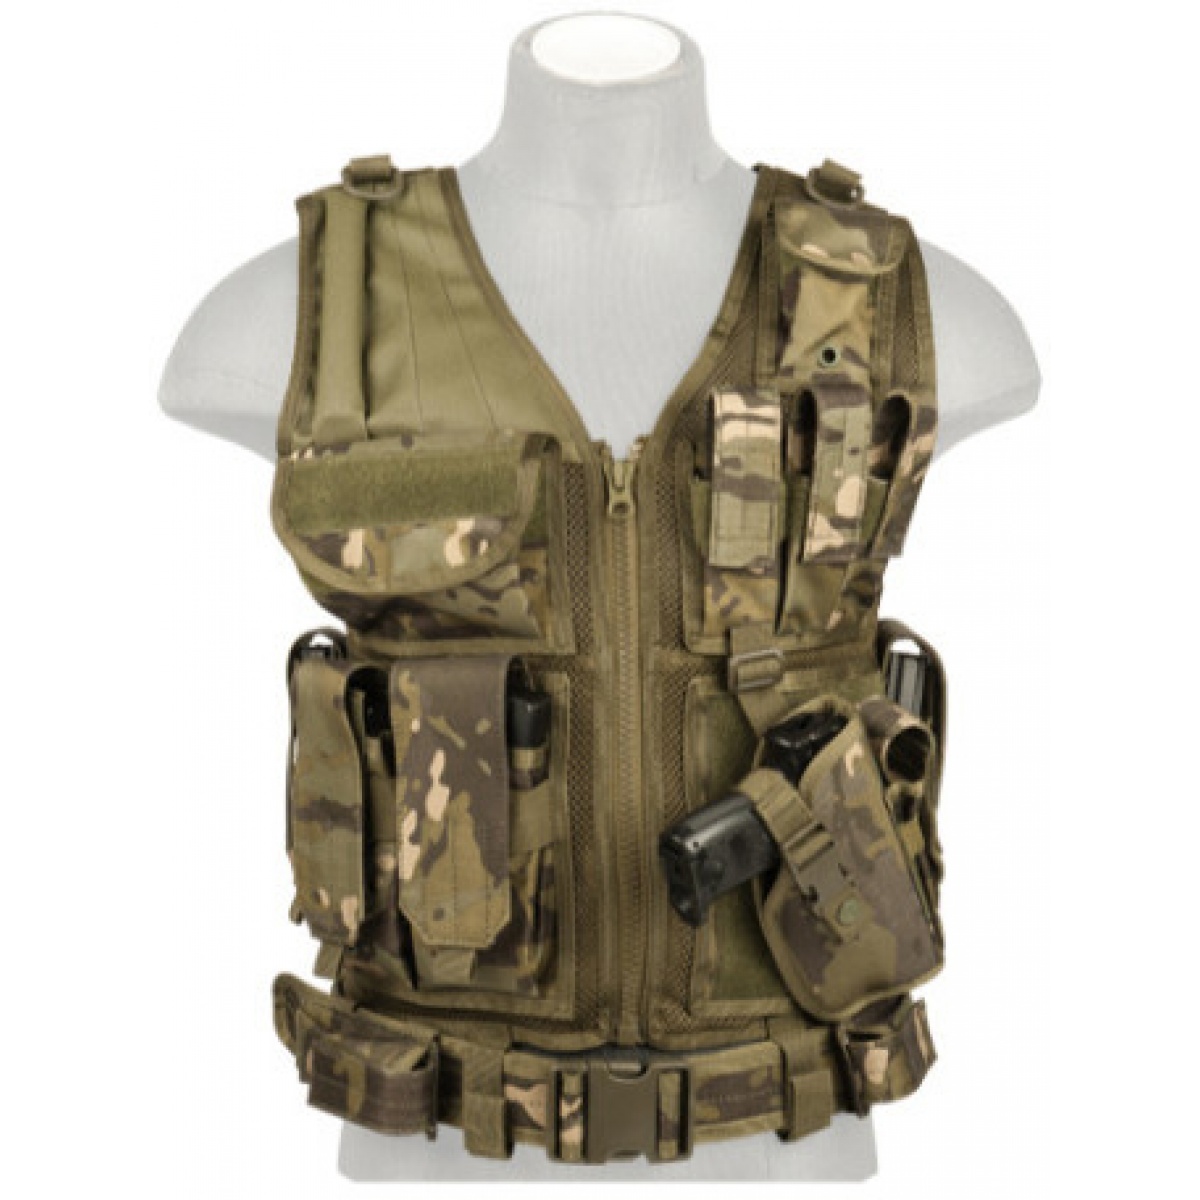 Camo Lancer Tactical Cross Draw Vest w/Holster 